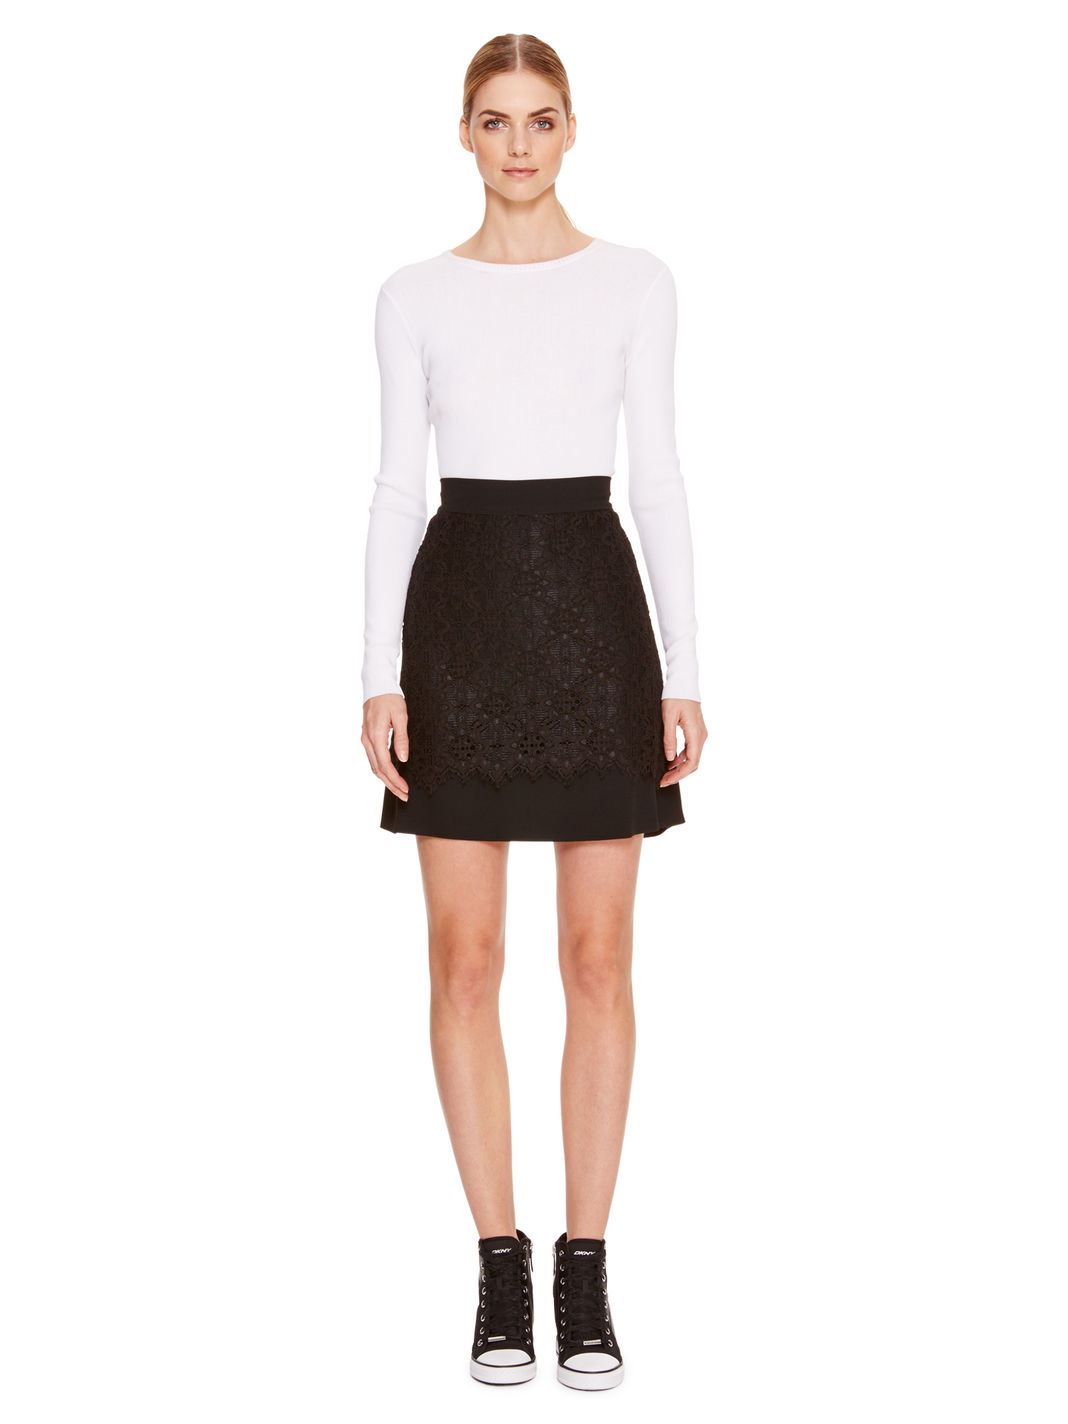 Dkny Lace Overlay A-line Skirt in Black | Lyst